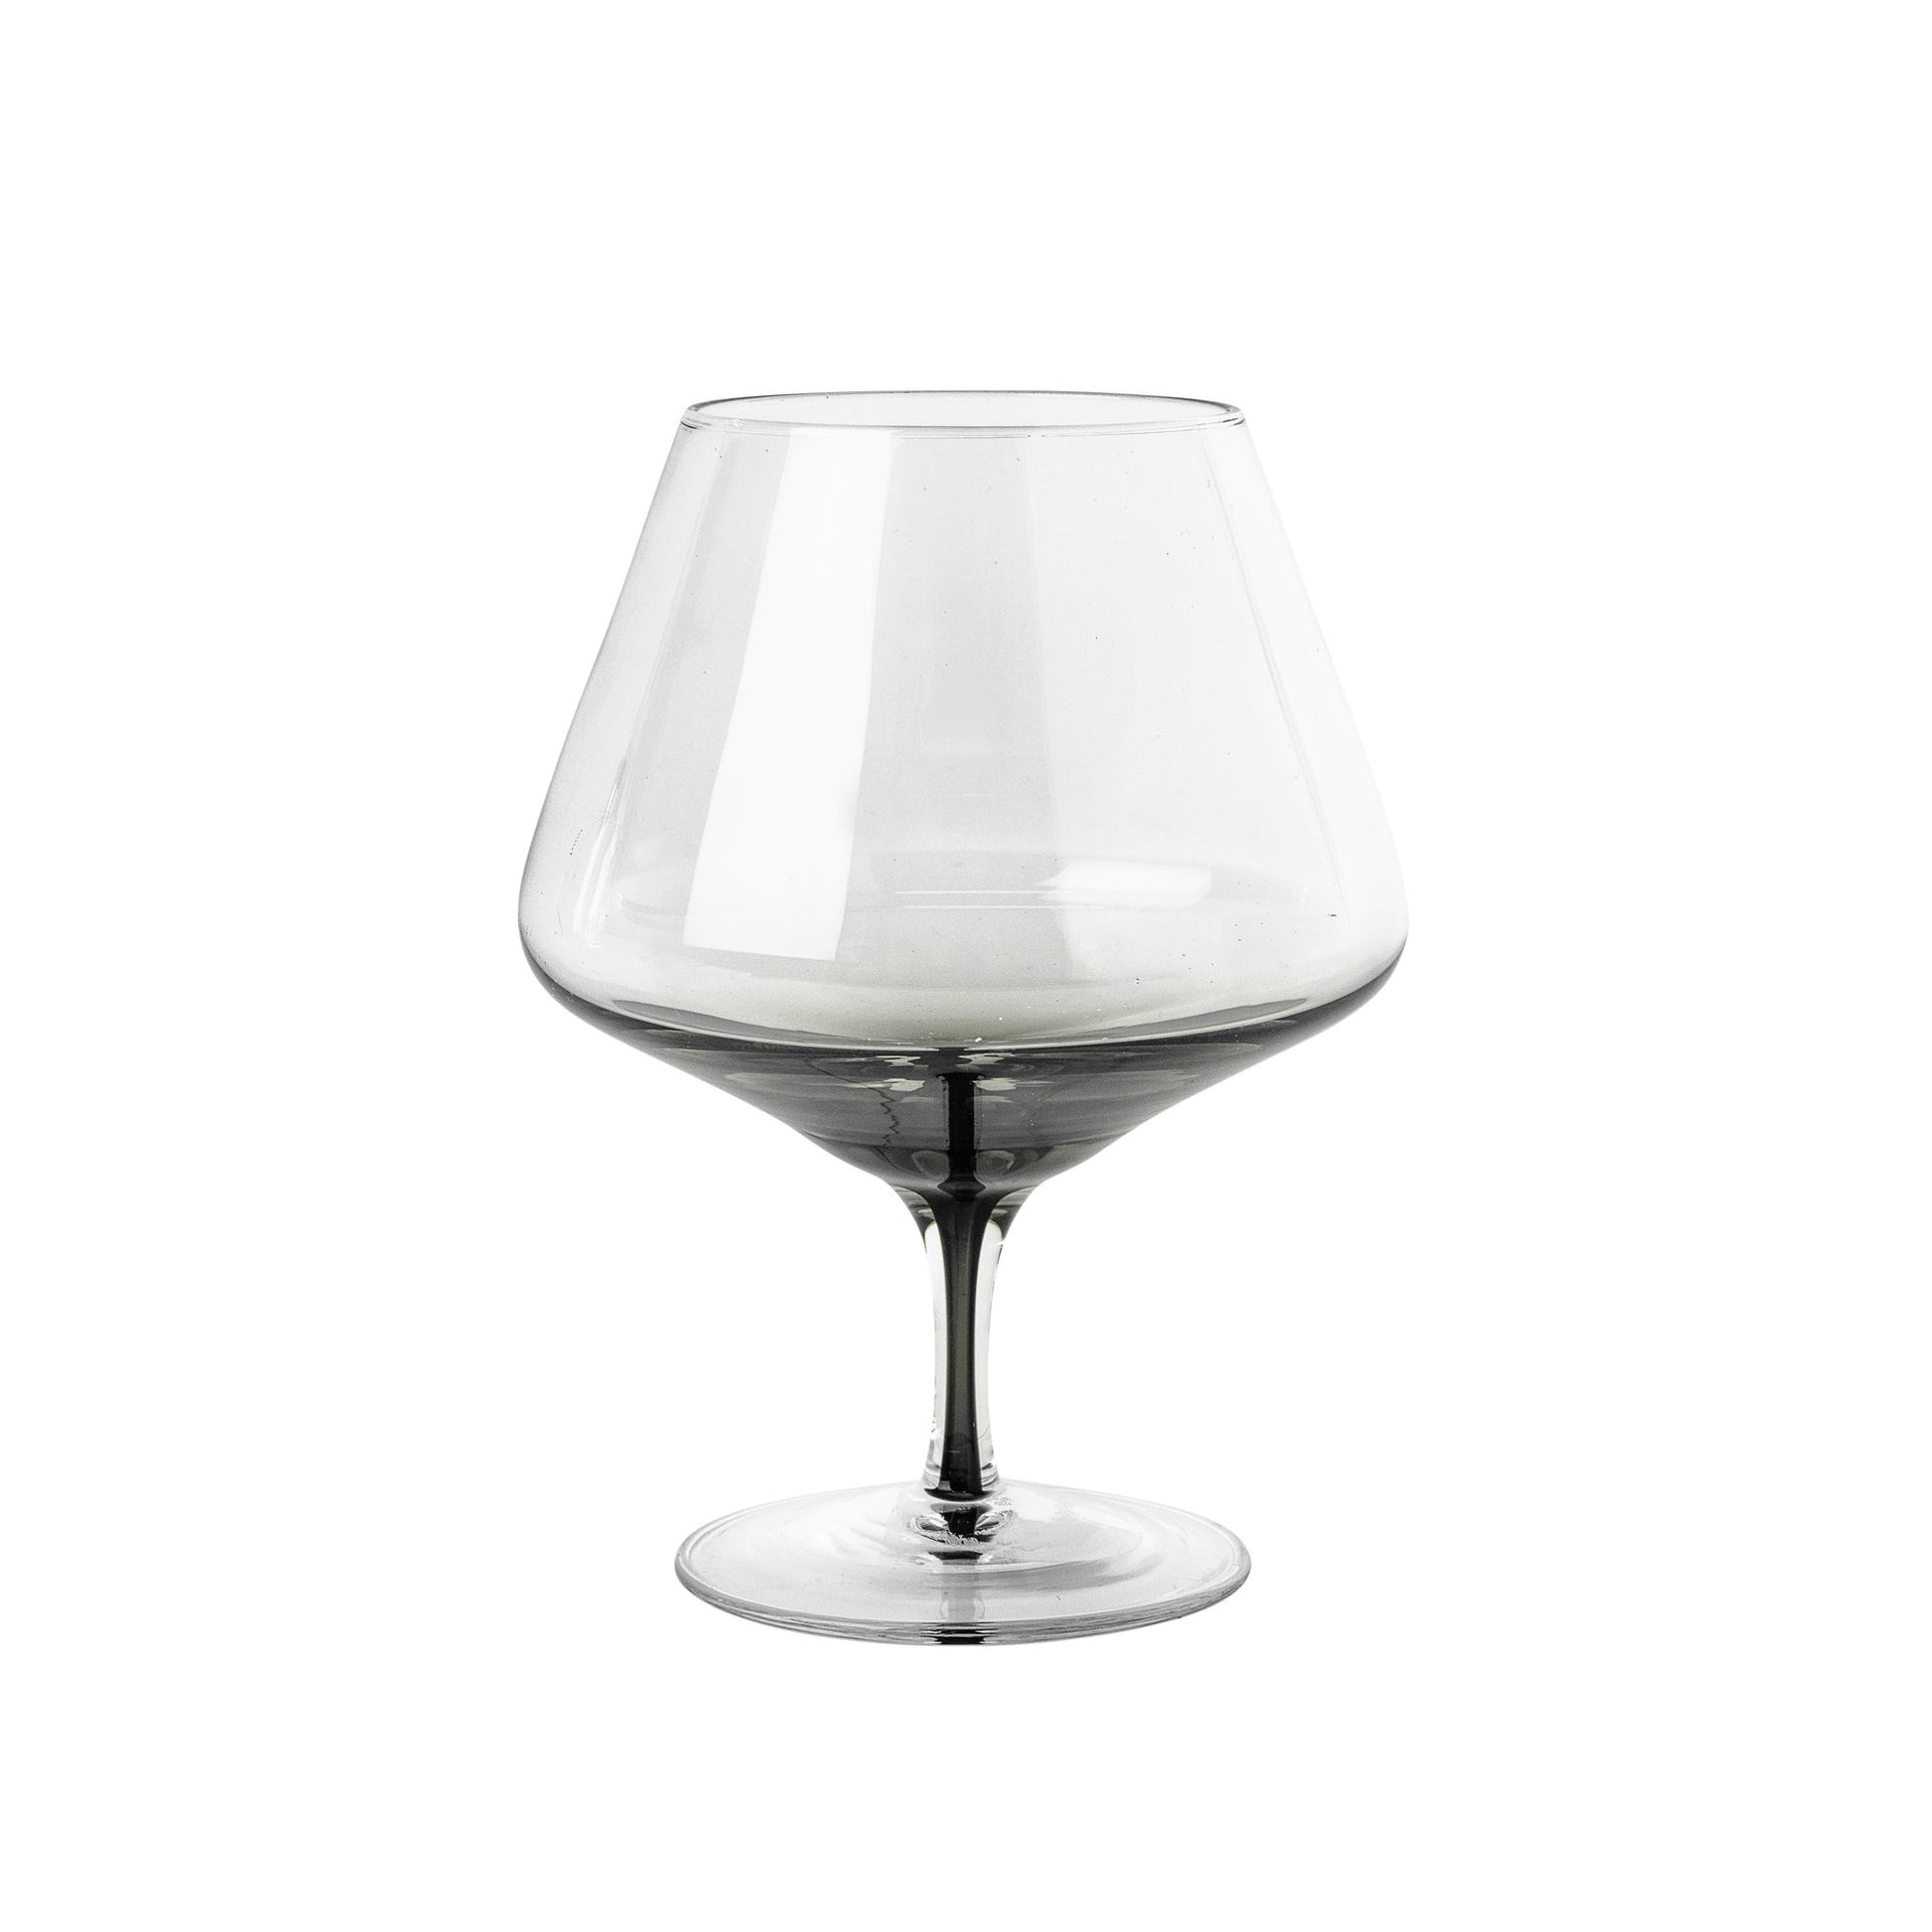 Serve cognac in the beautiful smokey grey glass from the Danish brand, Broste Copenhagen.  These hand blown wine glasses have a smokey grey bottom which carries down through the centre of the stem, to give them an edge over plain glassware. They would look stunning on any table.  Dimensions: 11cm diameter x 15cm high